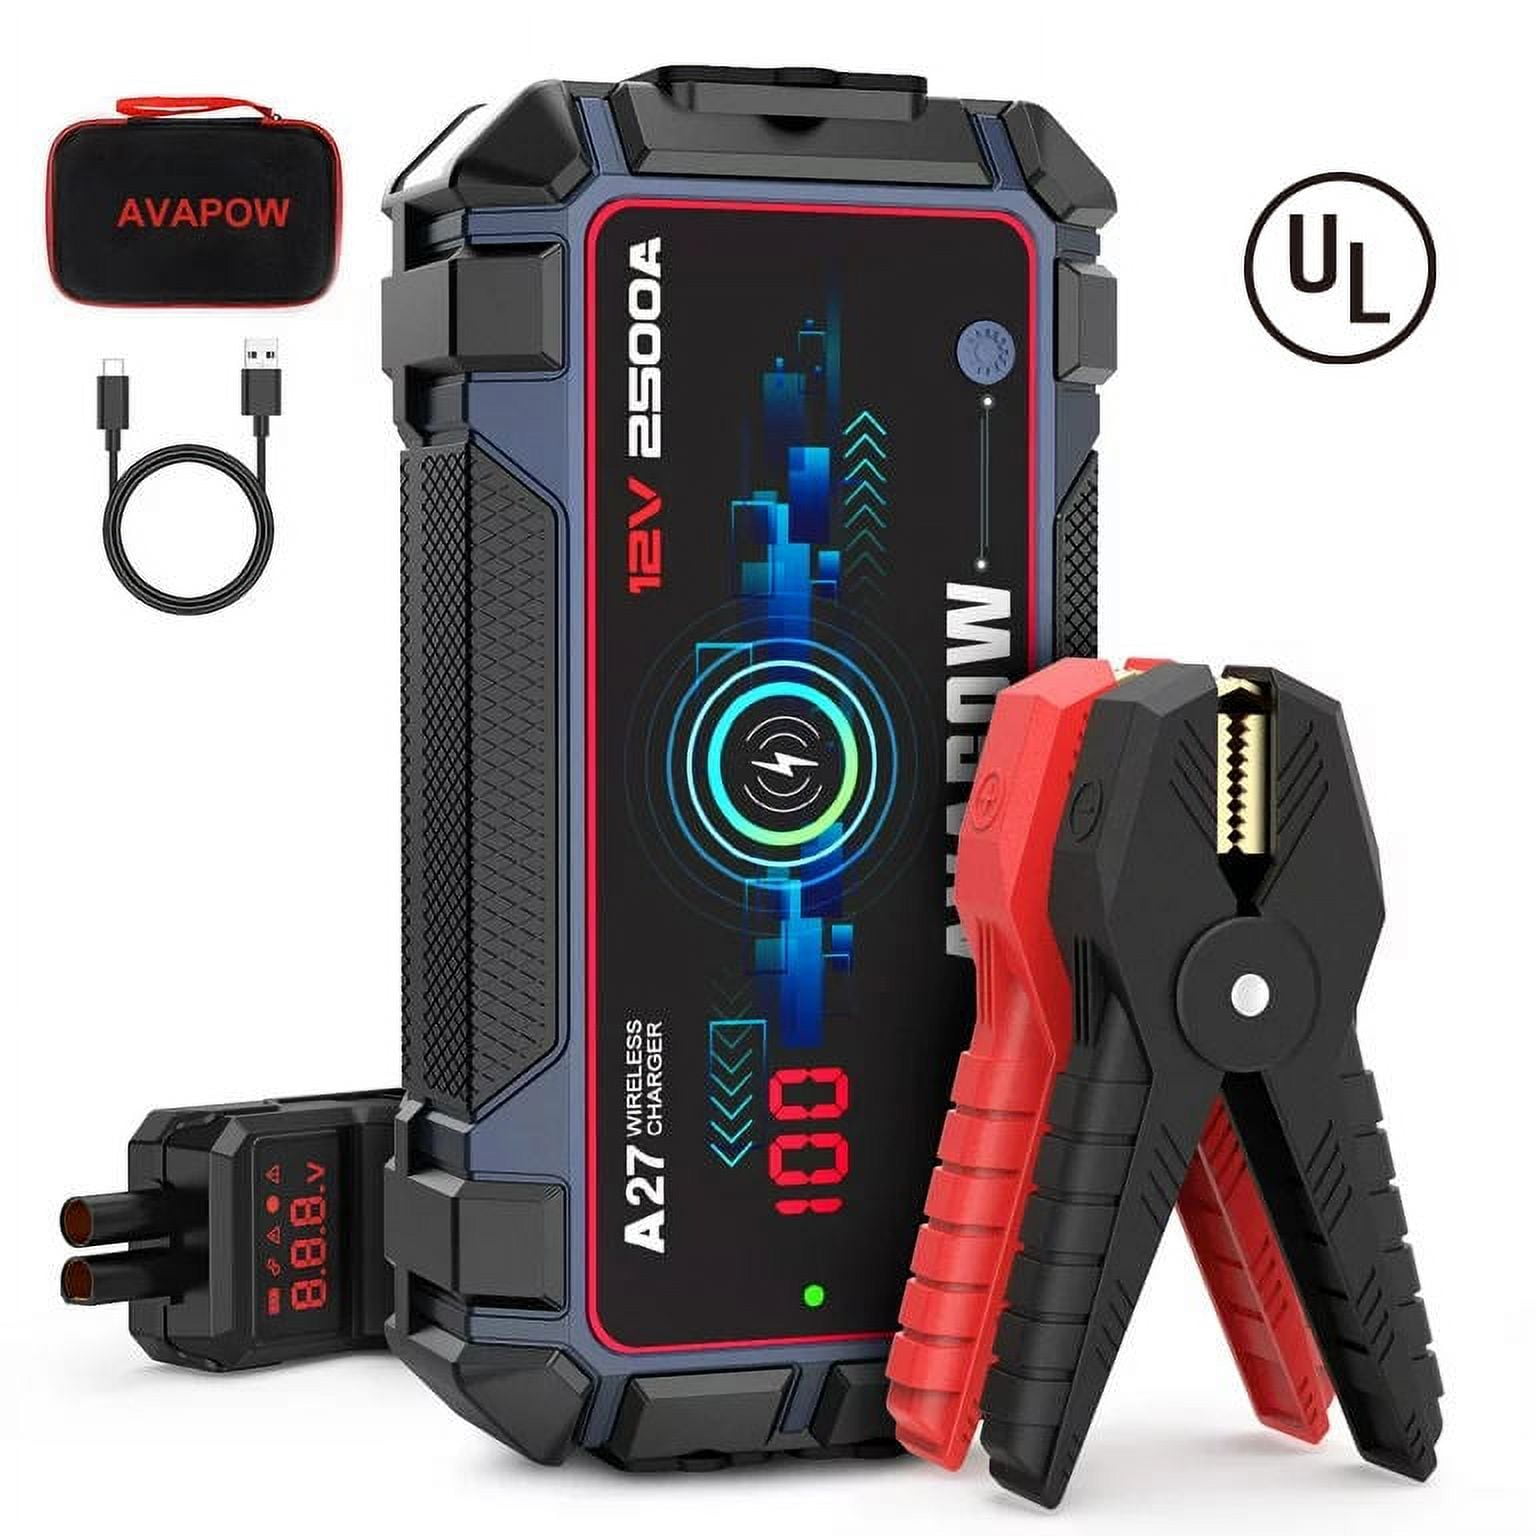 AVAPOW Battery Jump Starter 2500A Peak 22800mAh, Portable Jump Starters  Battery Booster Jump Box for up to 8L Gas 8L Diesel Engine, 12V Jump Pack  with Wireless Charging 